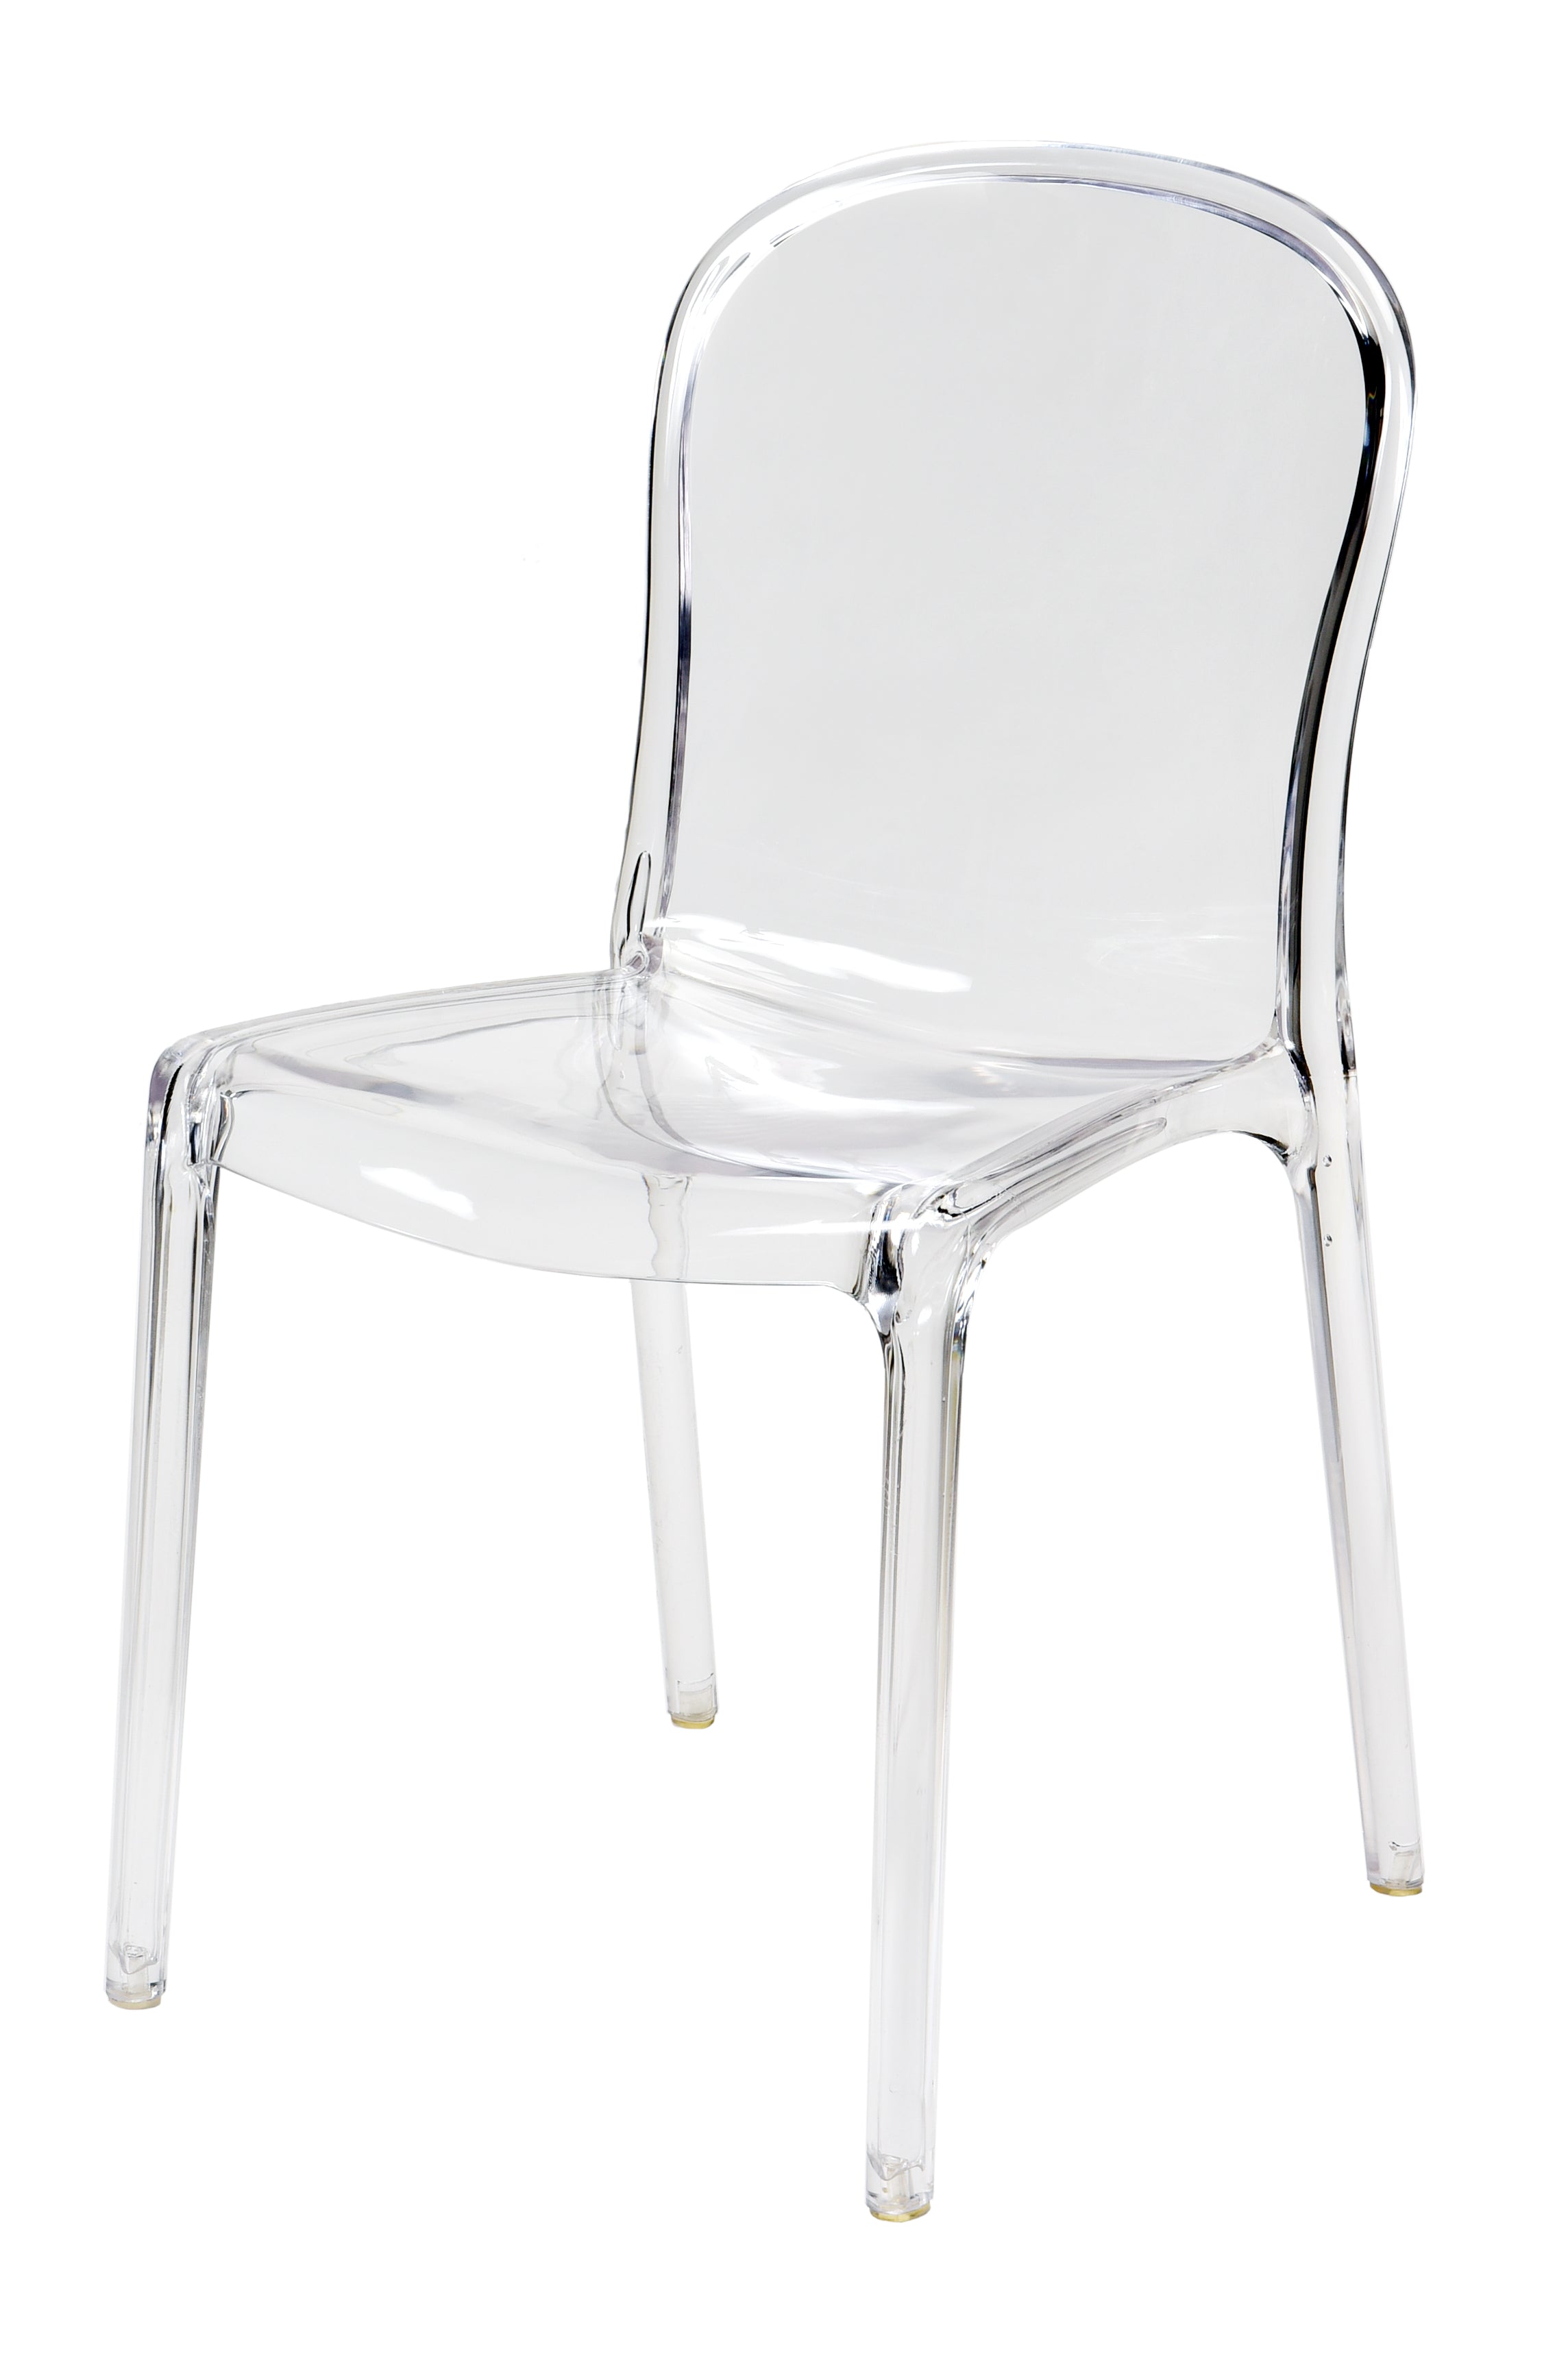  Set Of 4 Commerical Seating Products Rpc Cl Clear Genoa Chairs By CSP 